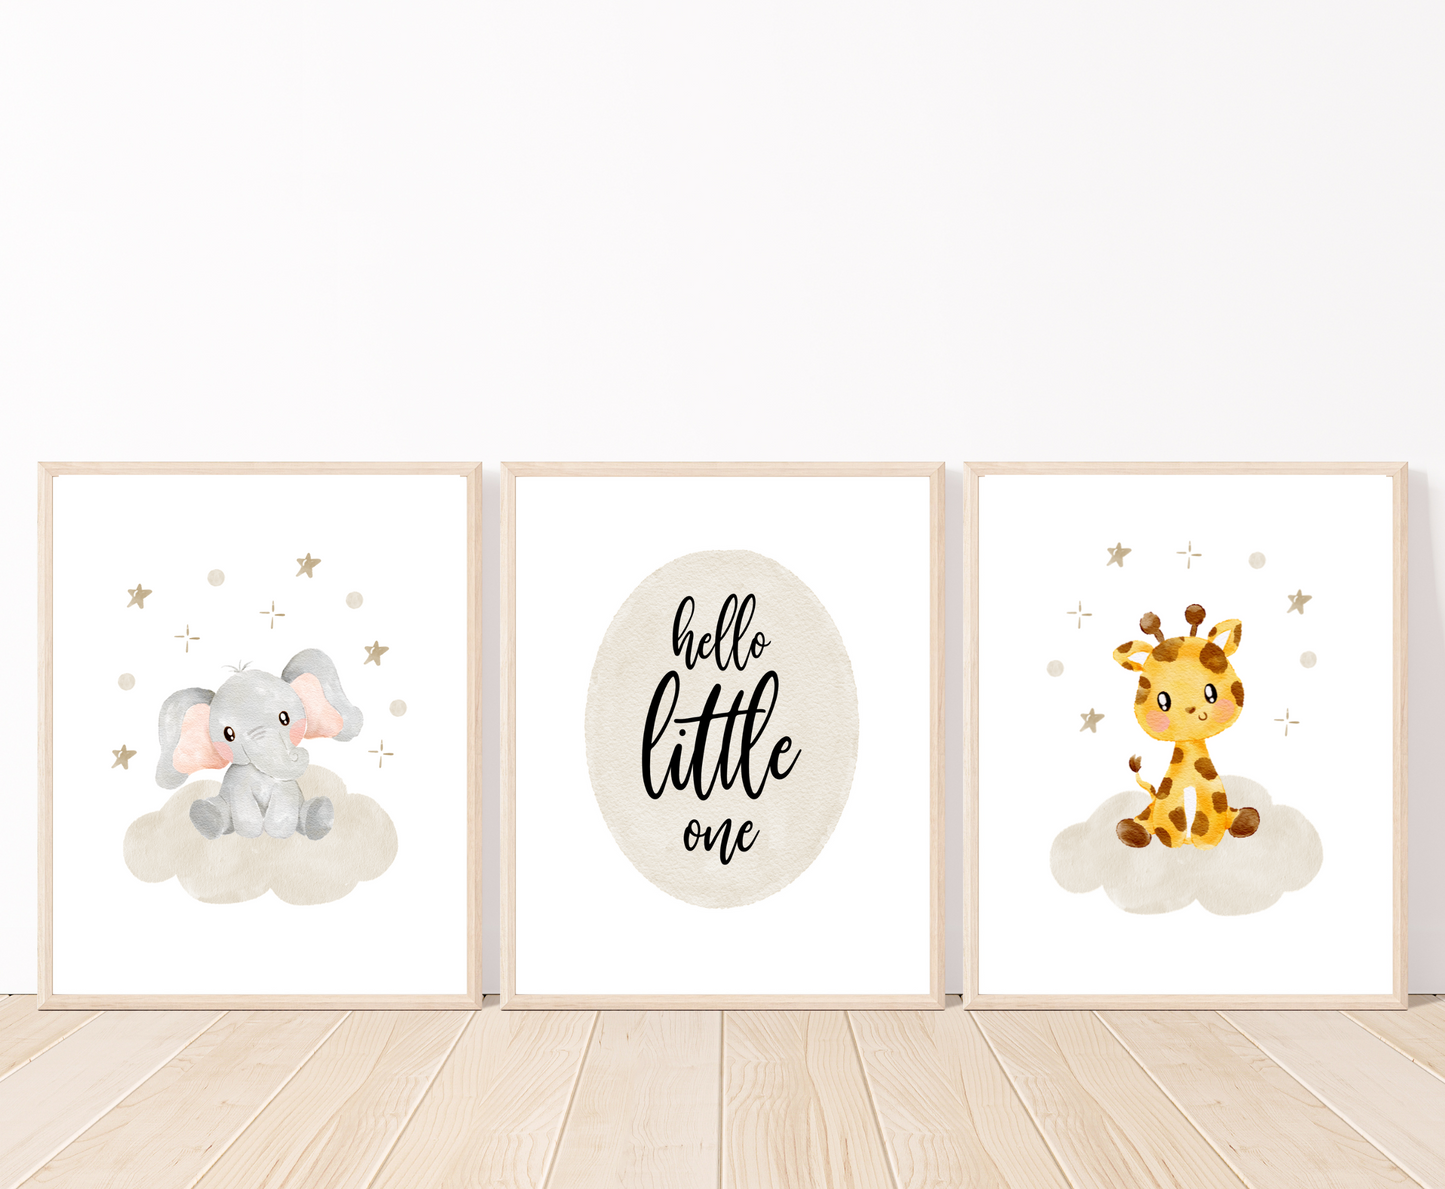 A picture of three digital printable graphics placed on a white wall and parquet flooring. The first one shows a graphic of a grey baby elephant sitting on a grey cloud with mini stars surrounding its head. The middle one has a piece of writing inside a grey oval shape that says “Hello little one”. The last one shows a cute baby giraffe sitting on a grey cloud with mini stars surrounding its head.